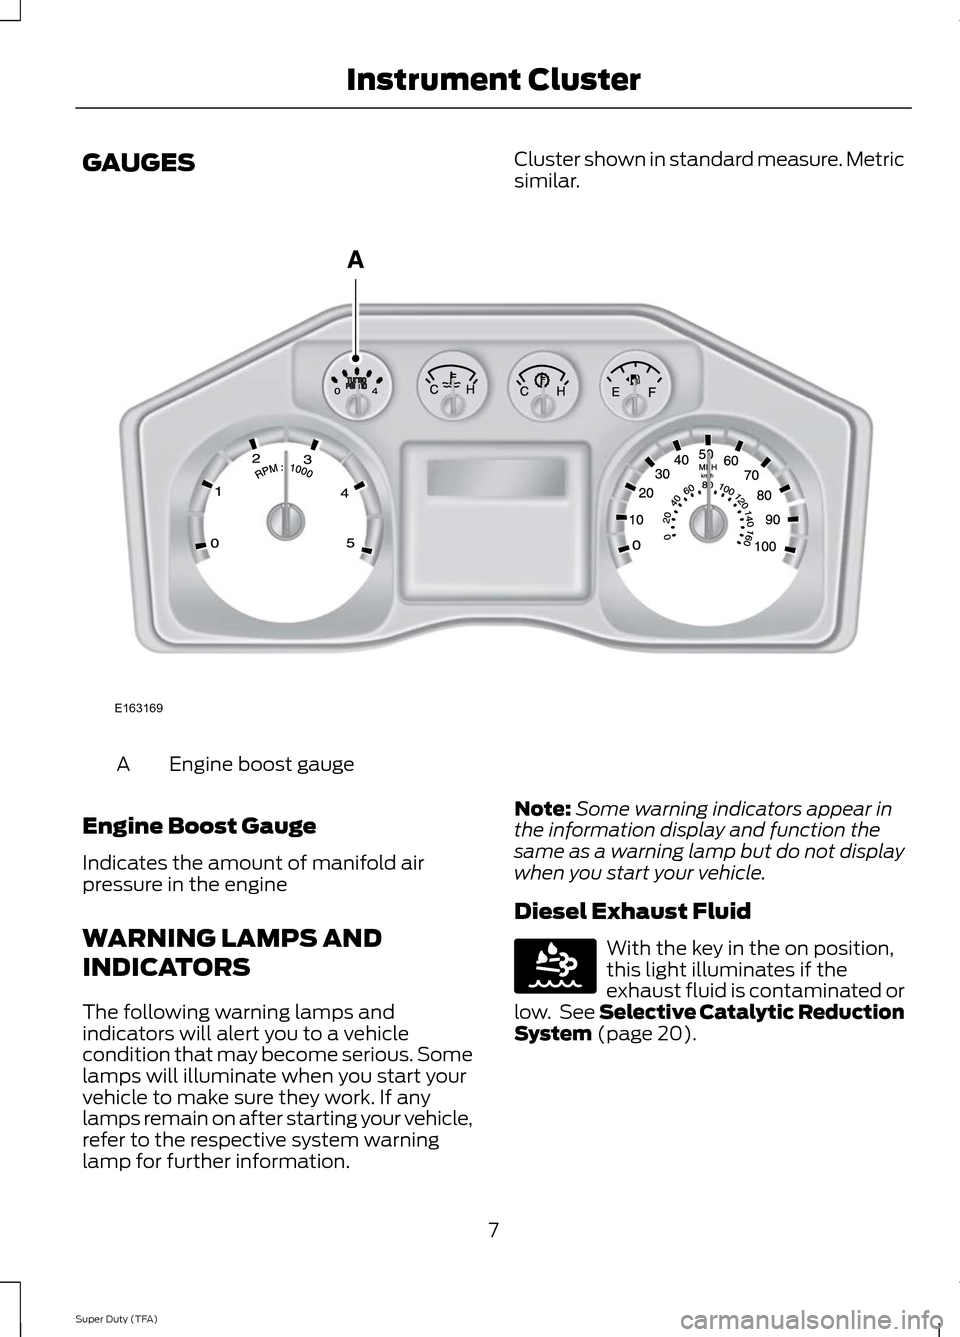 FORD SUPER DUTY 2014 3.G Diesel Supplement Manual GAUGES
Cluster shown in standard measure. Metric
similar.Engine boost gauge
A
Engine Boost Gauge
Indicates the amount of manifold air
pressure in the engine
WARNING LAMPS AND
INDICATORS
The following 